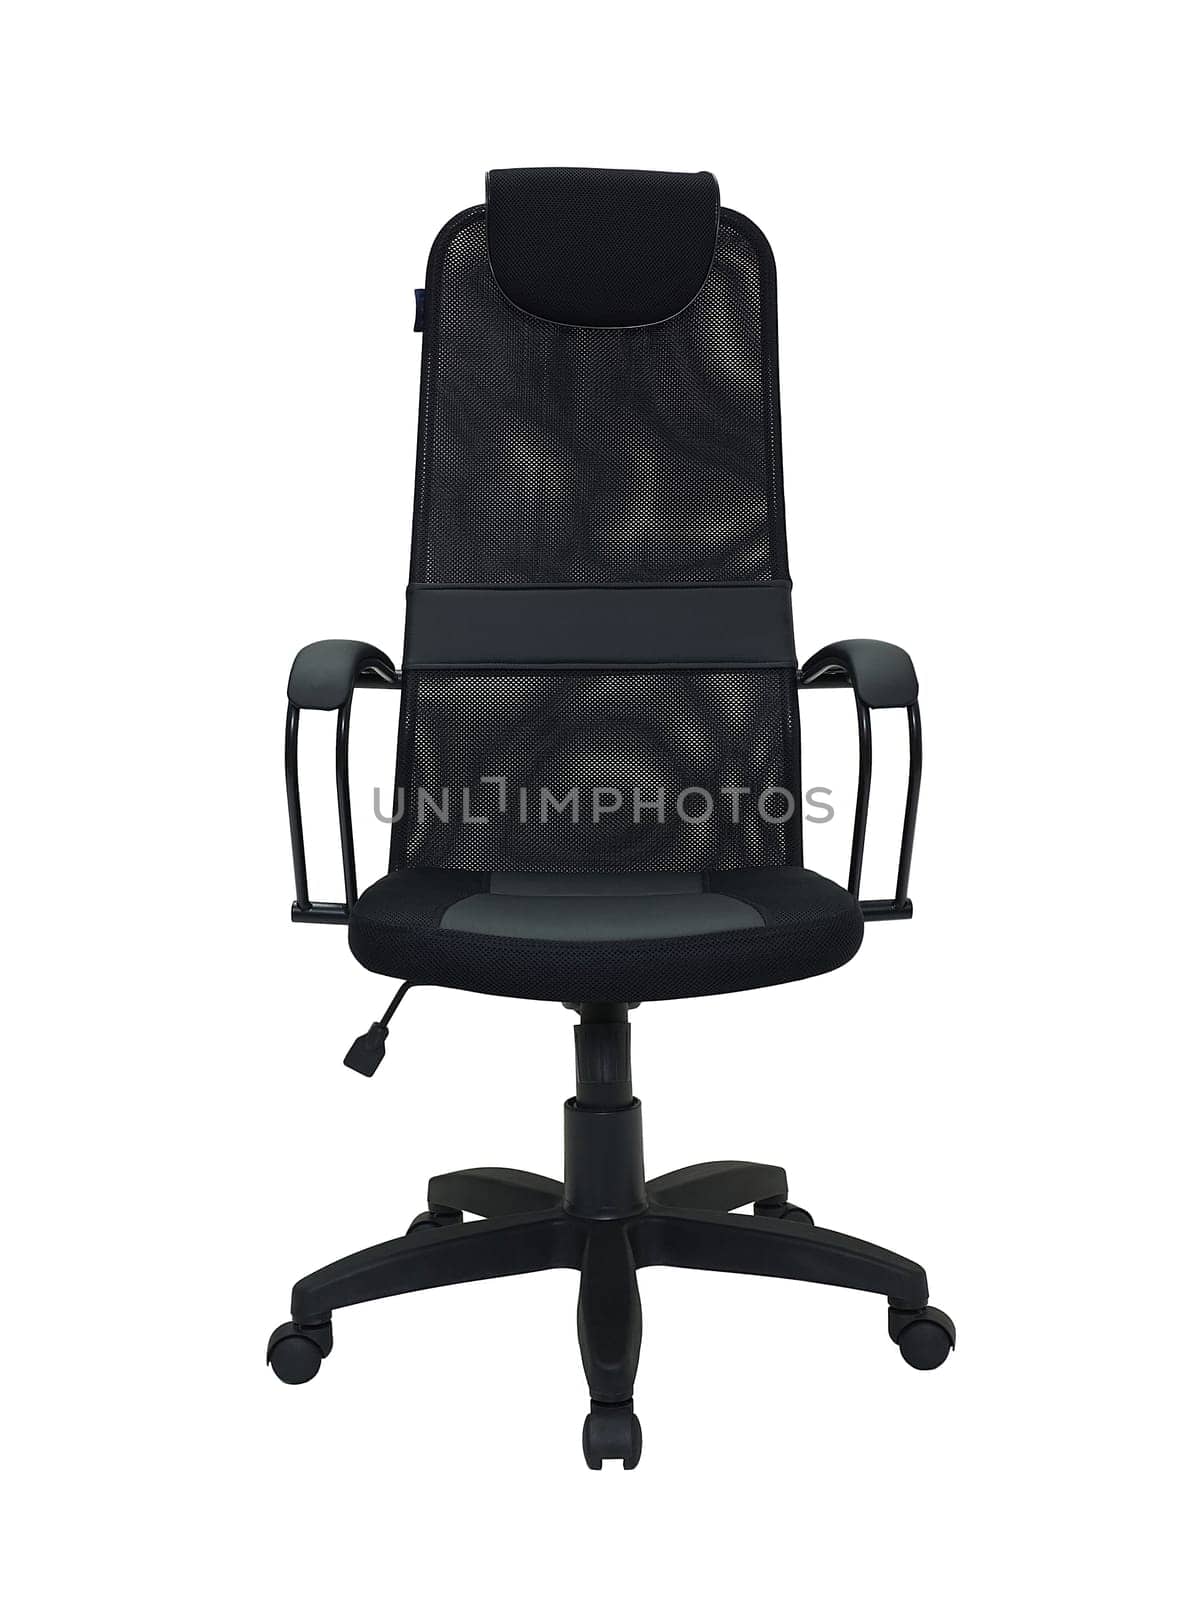 black office armchair on wheels isolated on white background, front view. furniture in minimal style